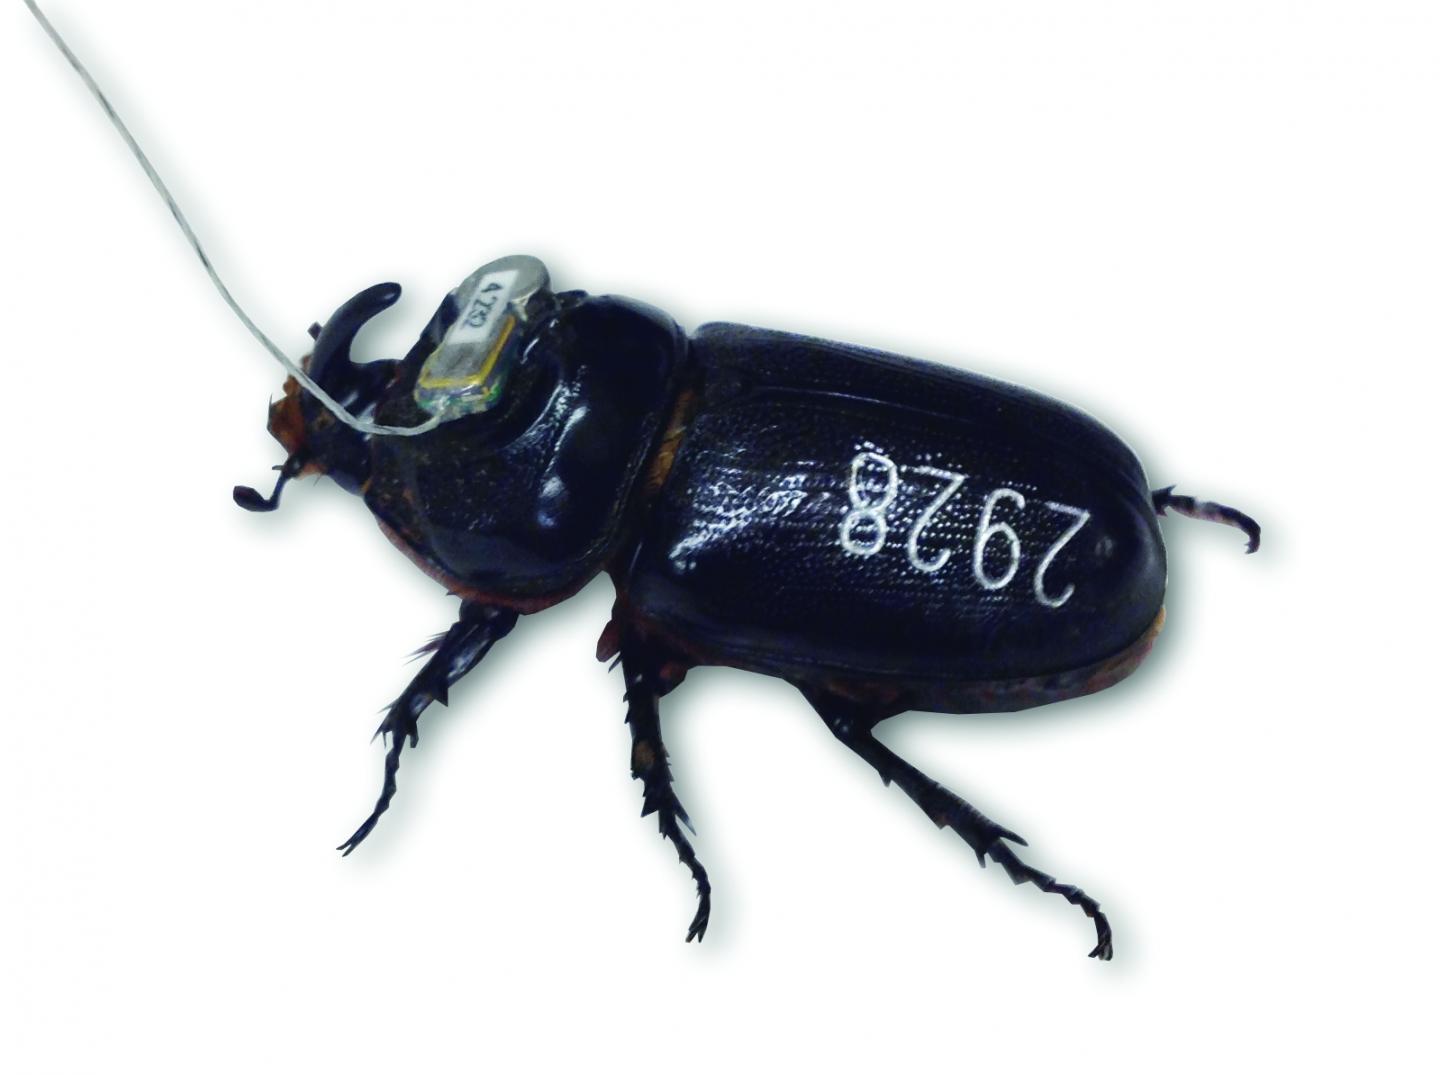 Beetle with Transmitter Attached